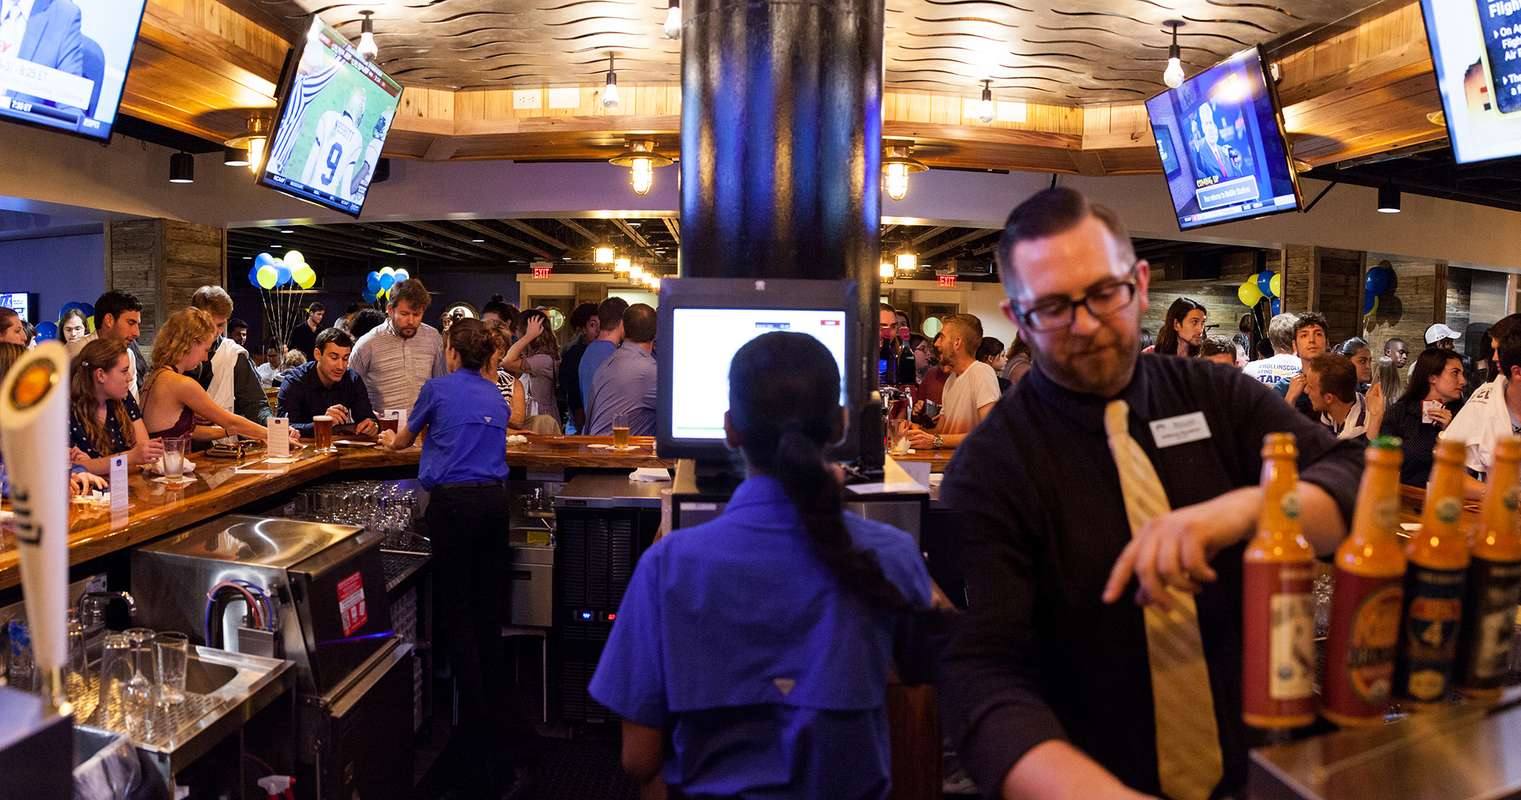 Bartenders serve beer and food in Dave’s Boathouse.